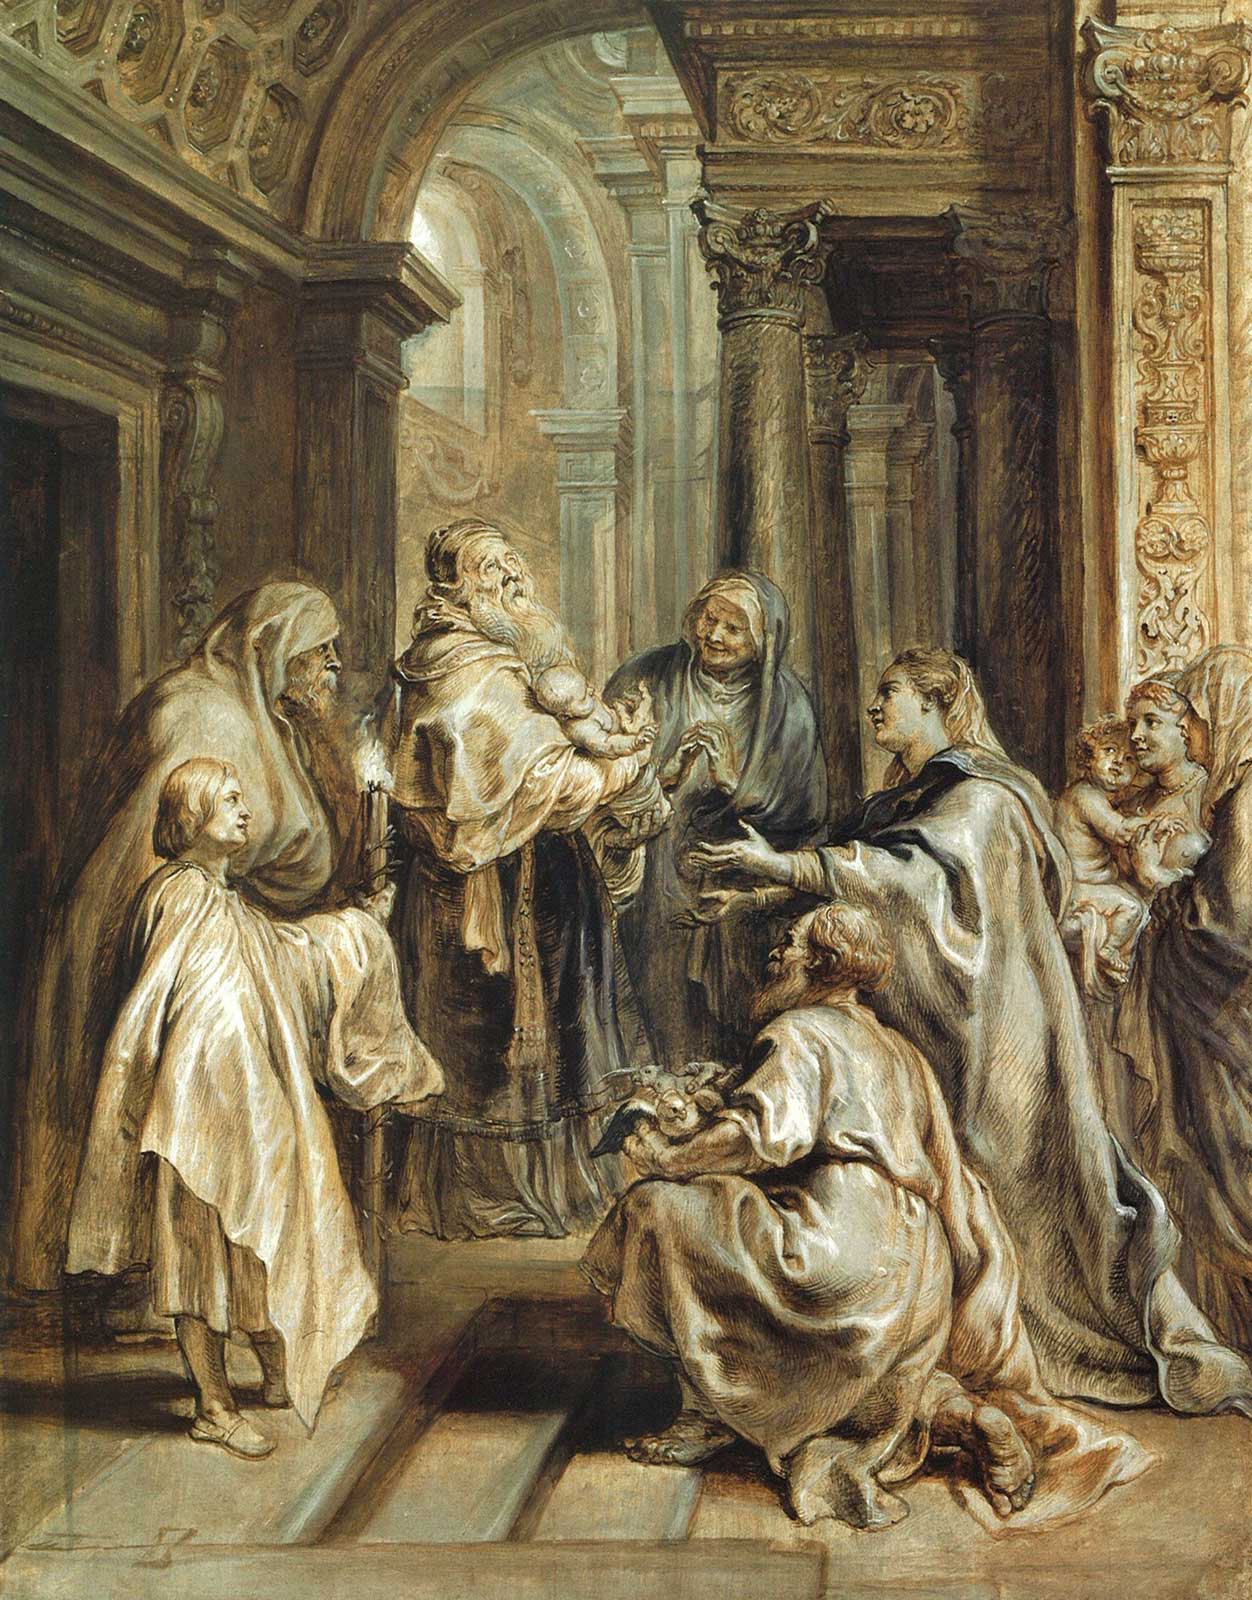 Flanders Sir Peter Paul Rubens (Flanders, b.1577, d.1640) The Presentation in the Temple circa 1632-circa 1633 oil on oak panel, 63.5 x 49.6 x 0.3 cm Art Gallery of New South Wales Gift of Bridgestar Pty Ltd an investment company of the Late James Fairfax AC 2021. Donated through the Australian Government's Cultural Gifts Program Photo: AGNSW 93.2021